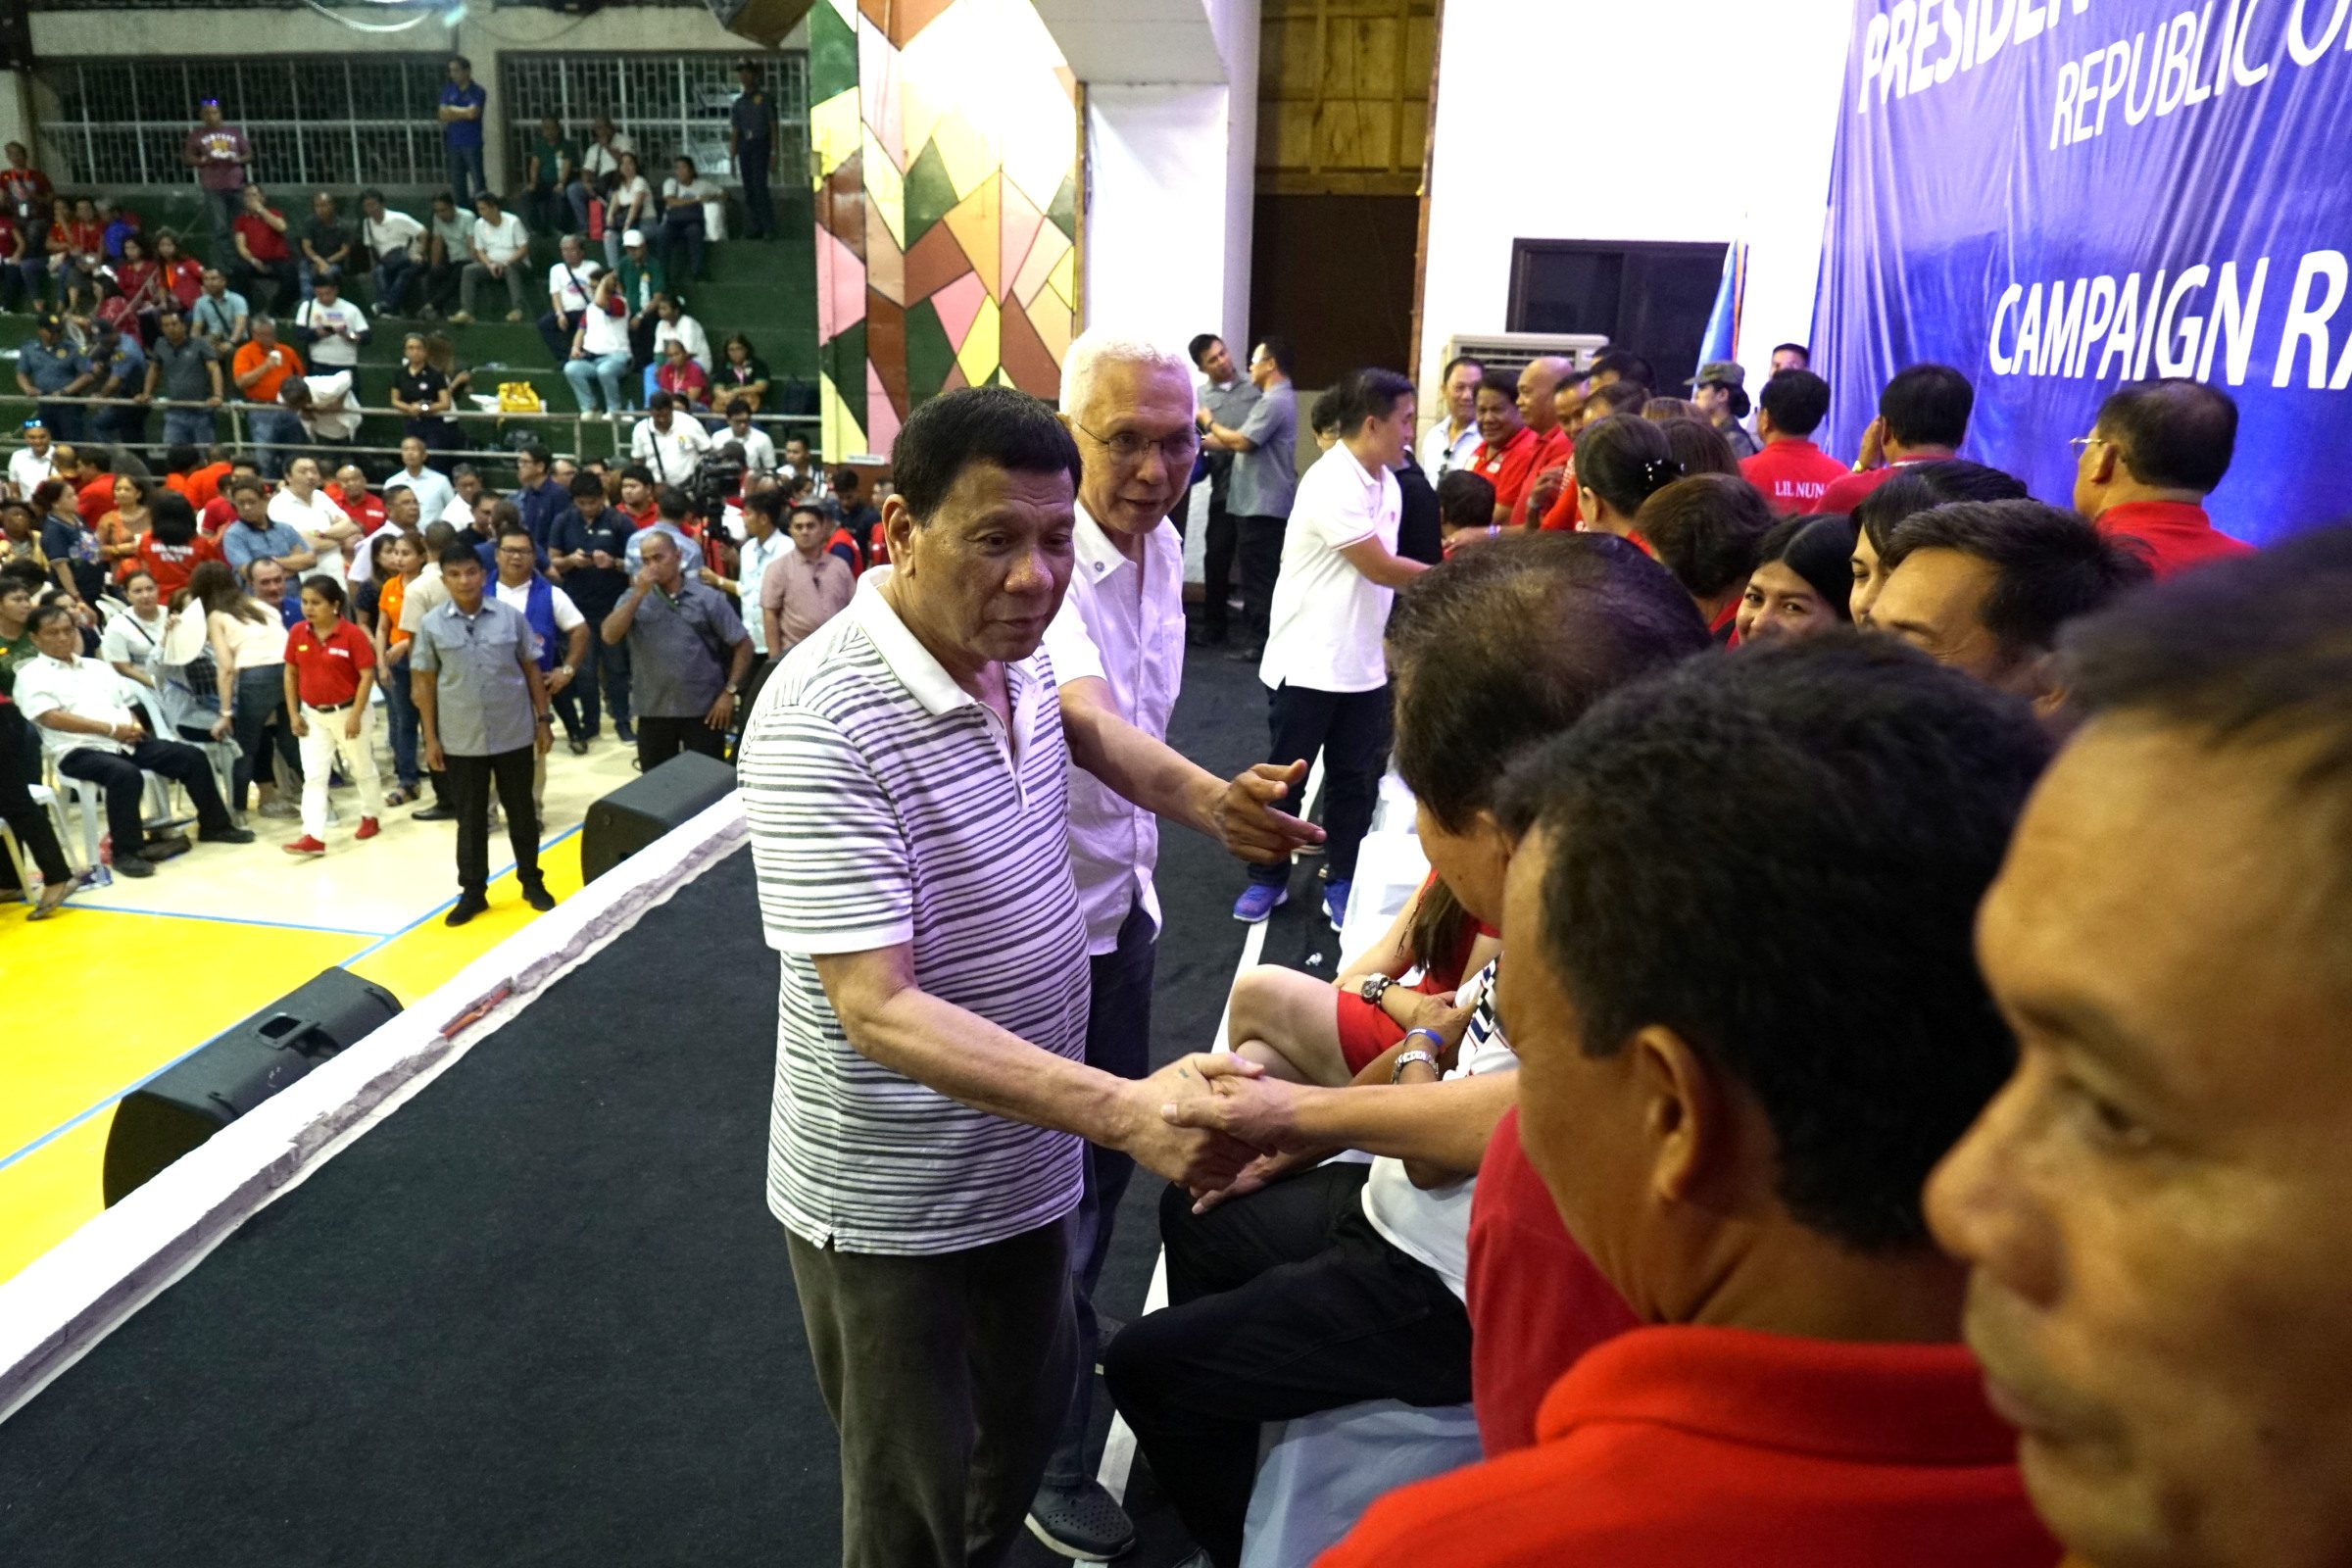 Duterte’s prolonged absences, skipped events? ‘Overworked, resting’